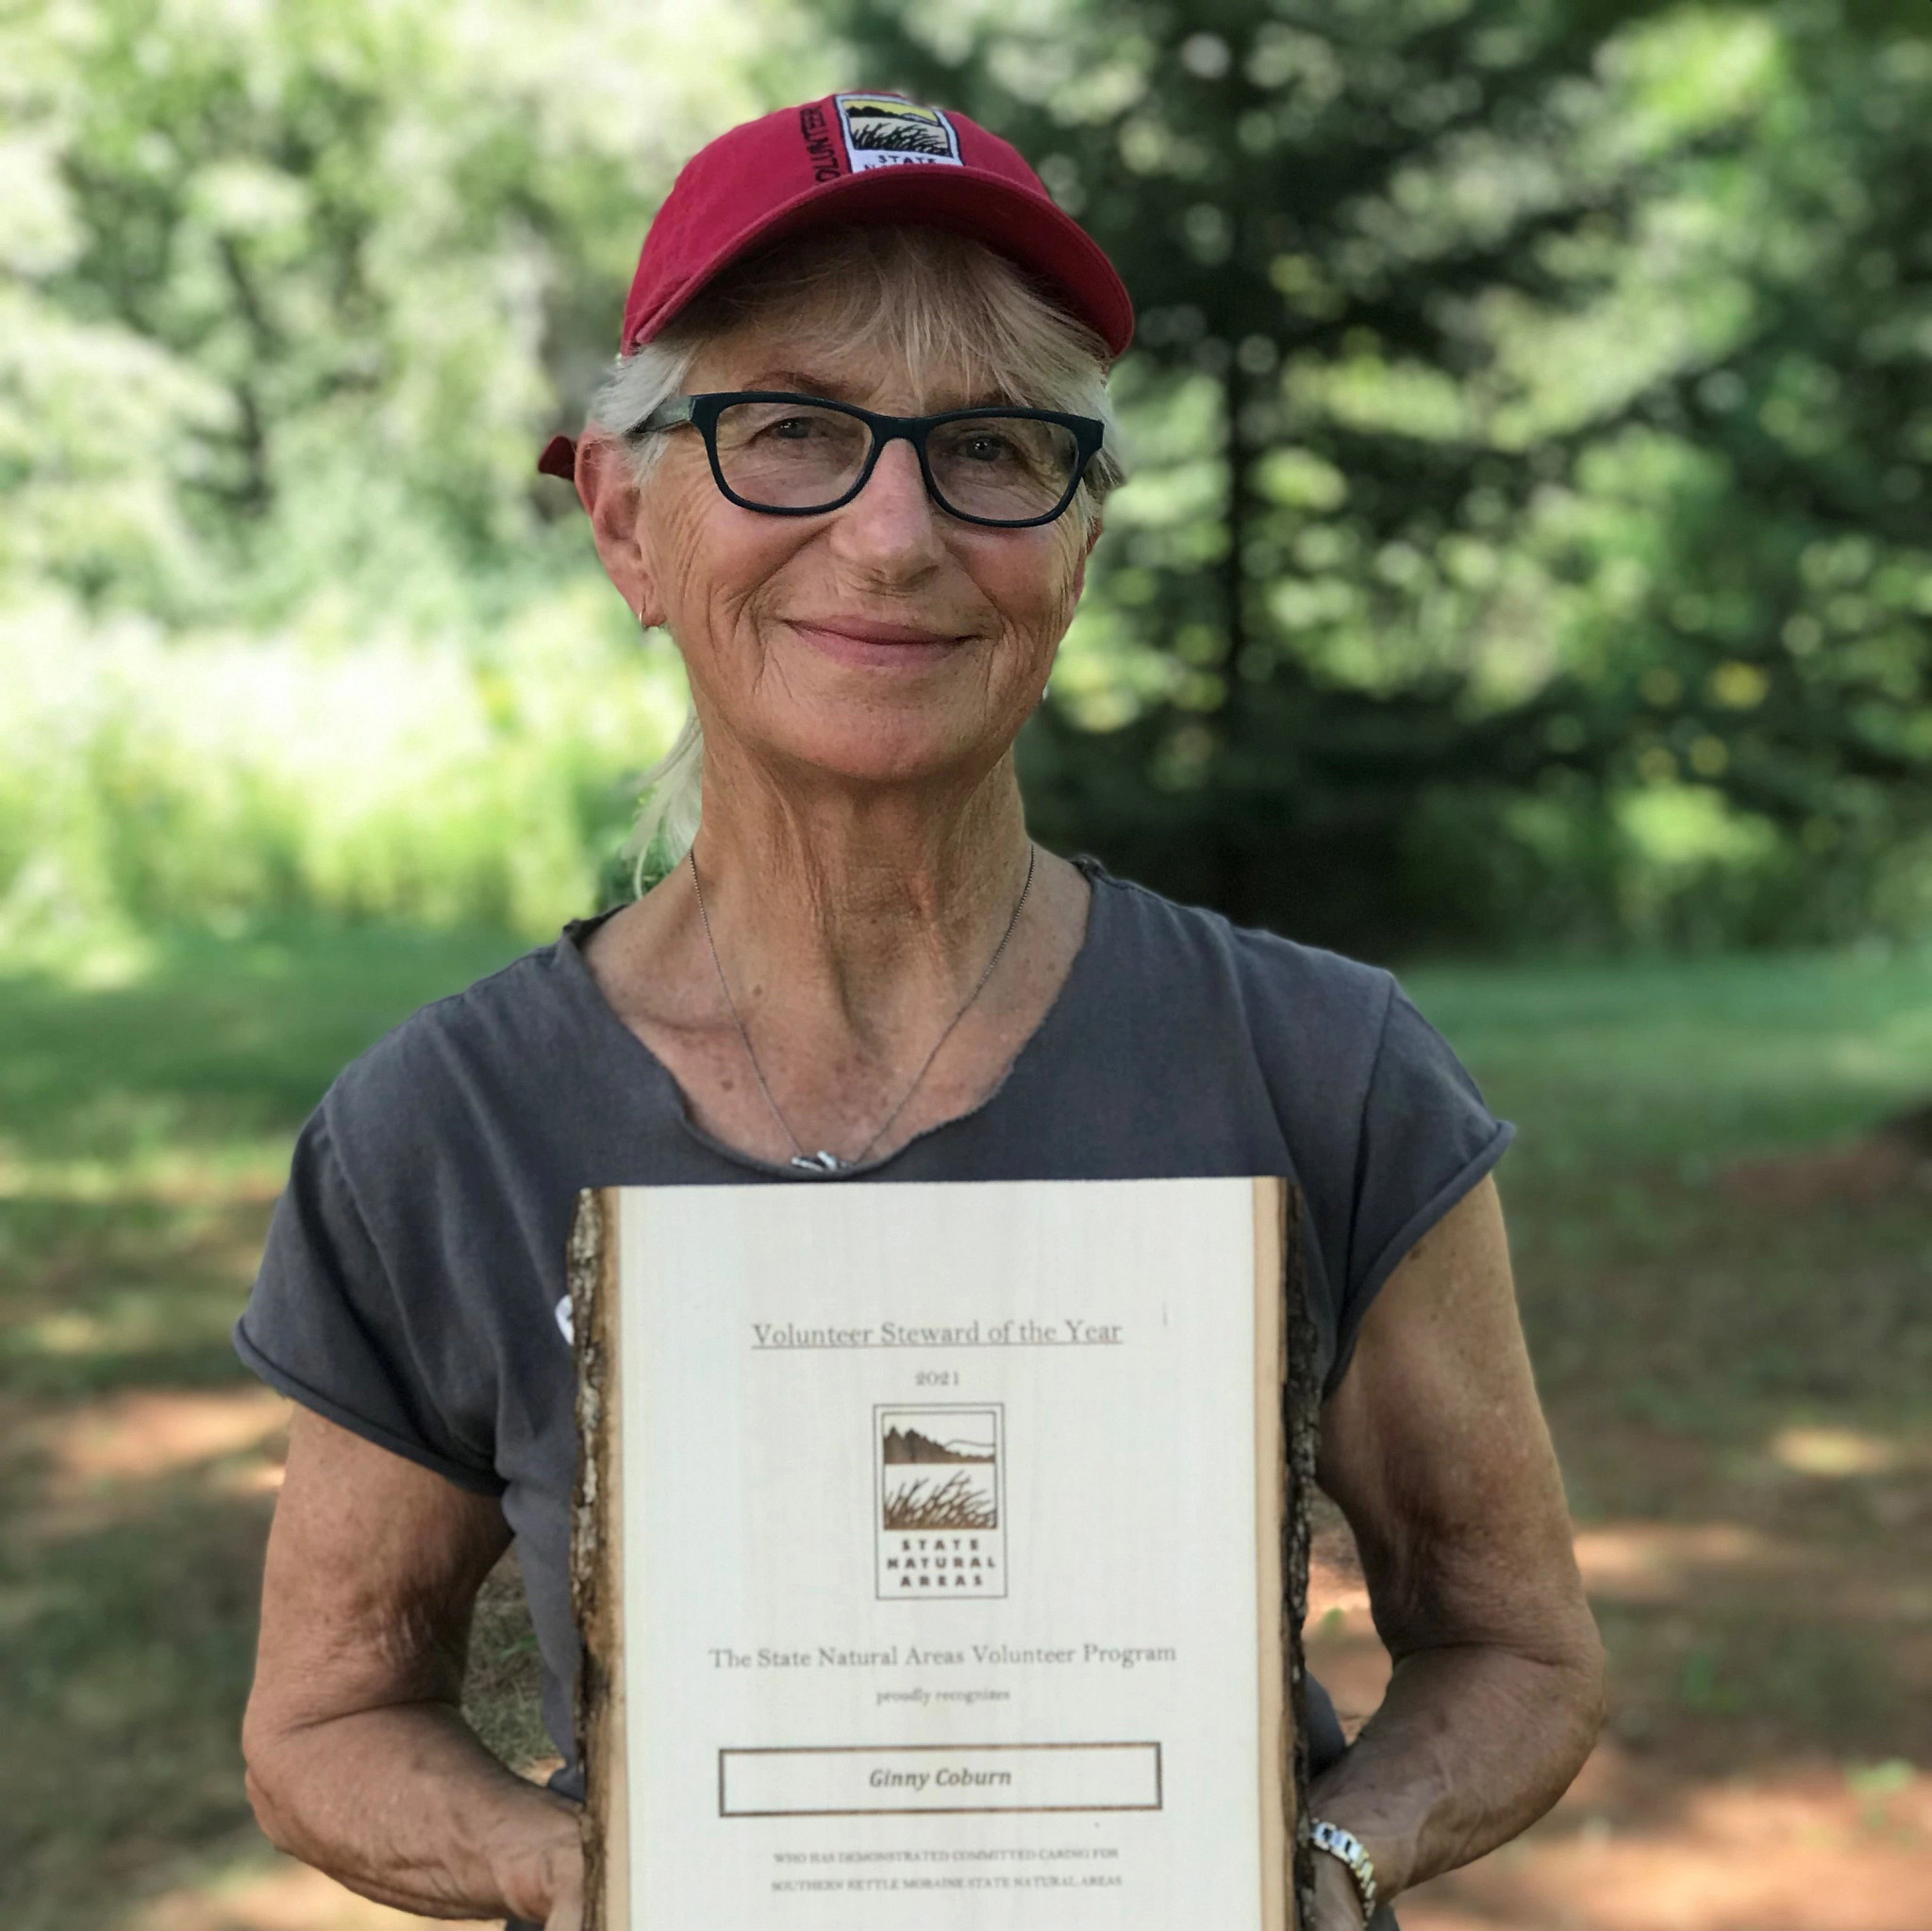 Ginny Coburn, with light skin tone, gray hair, a red baseball cap and glasses, smiles holding up her Volunteer Steward of the Year award. 